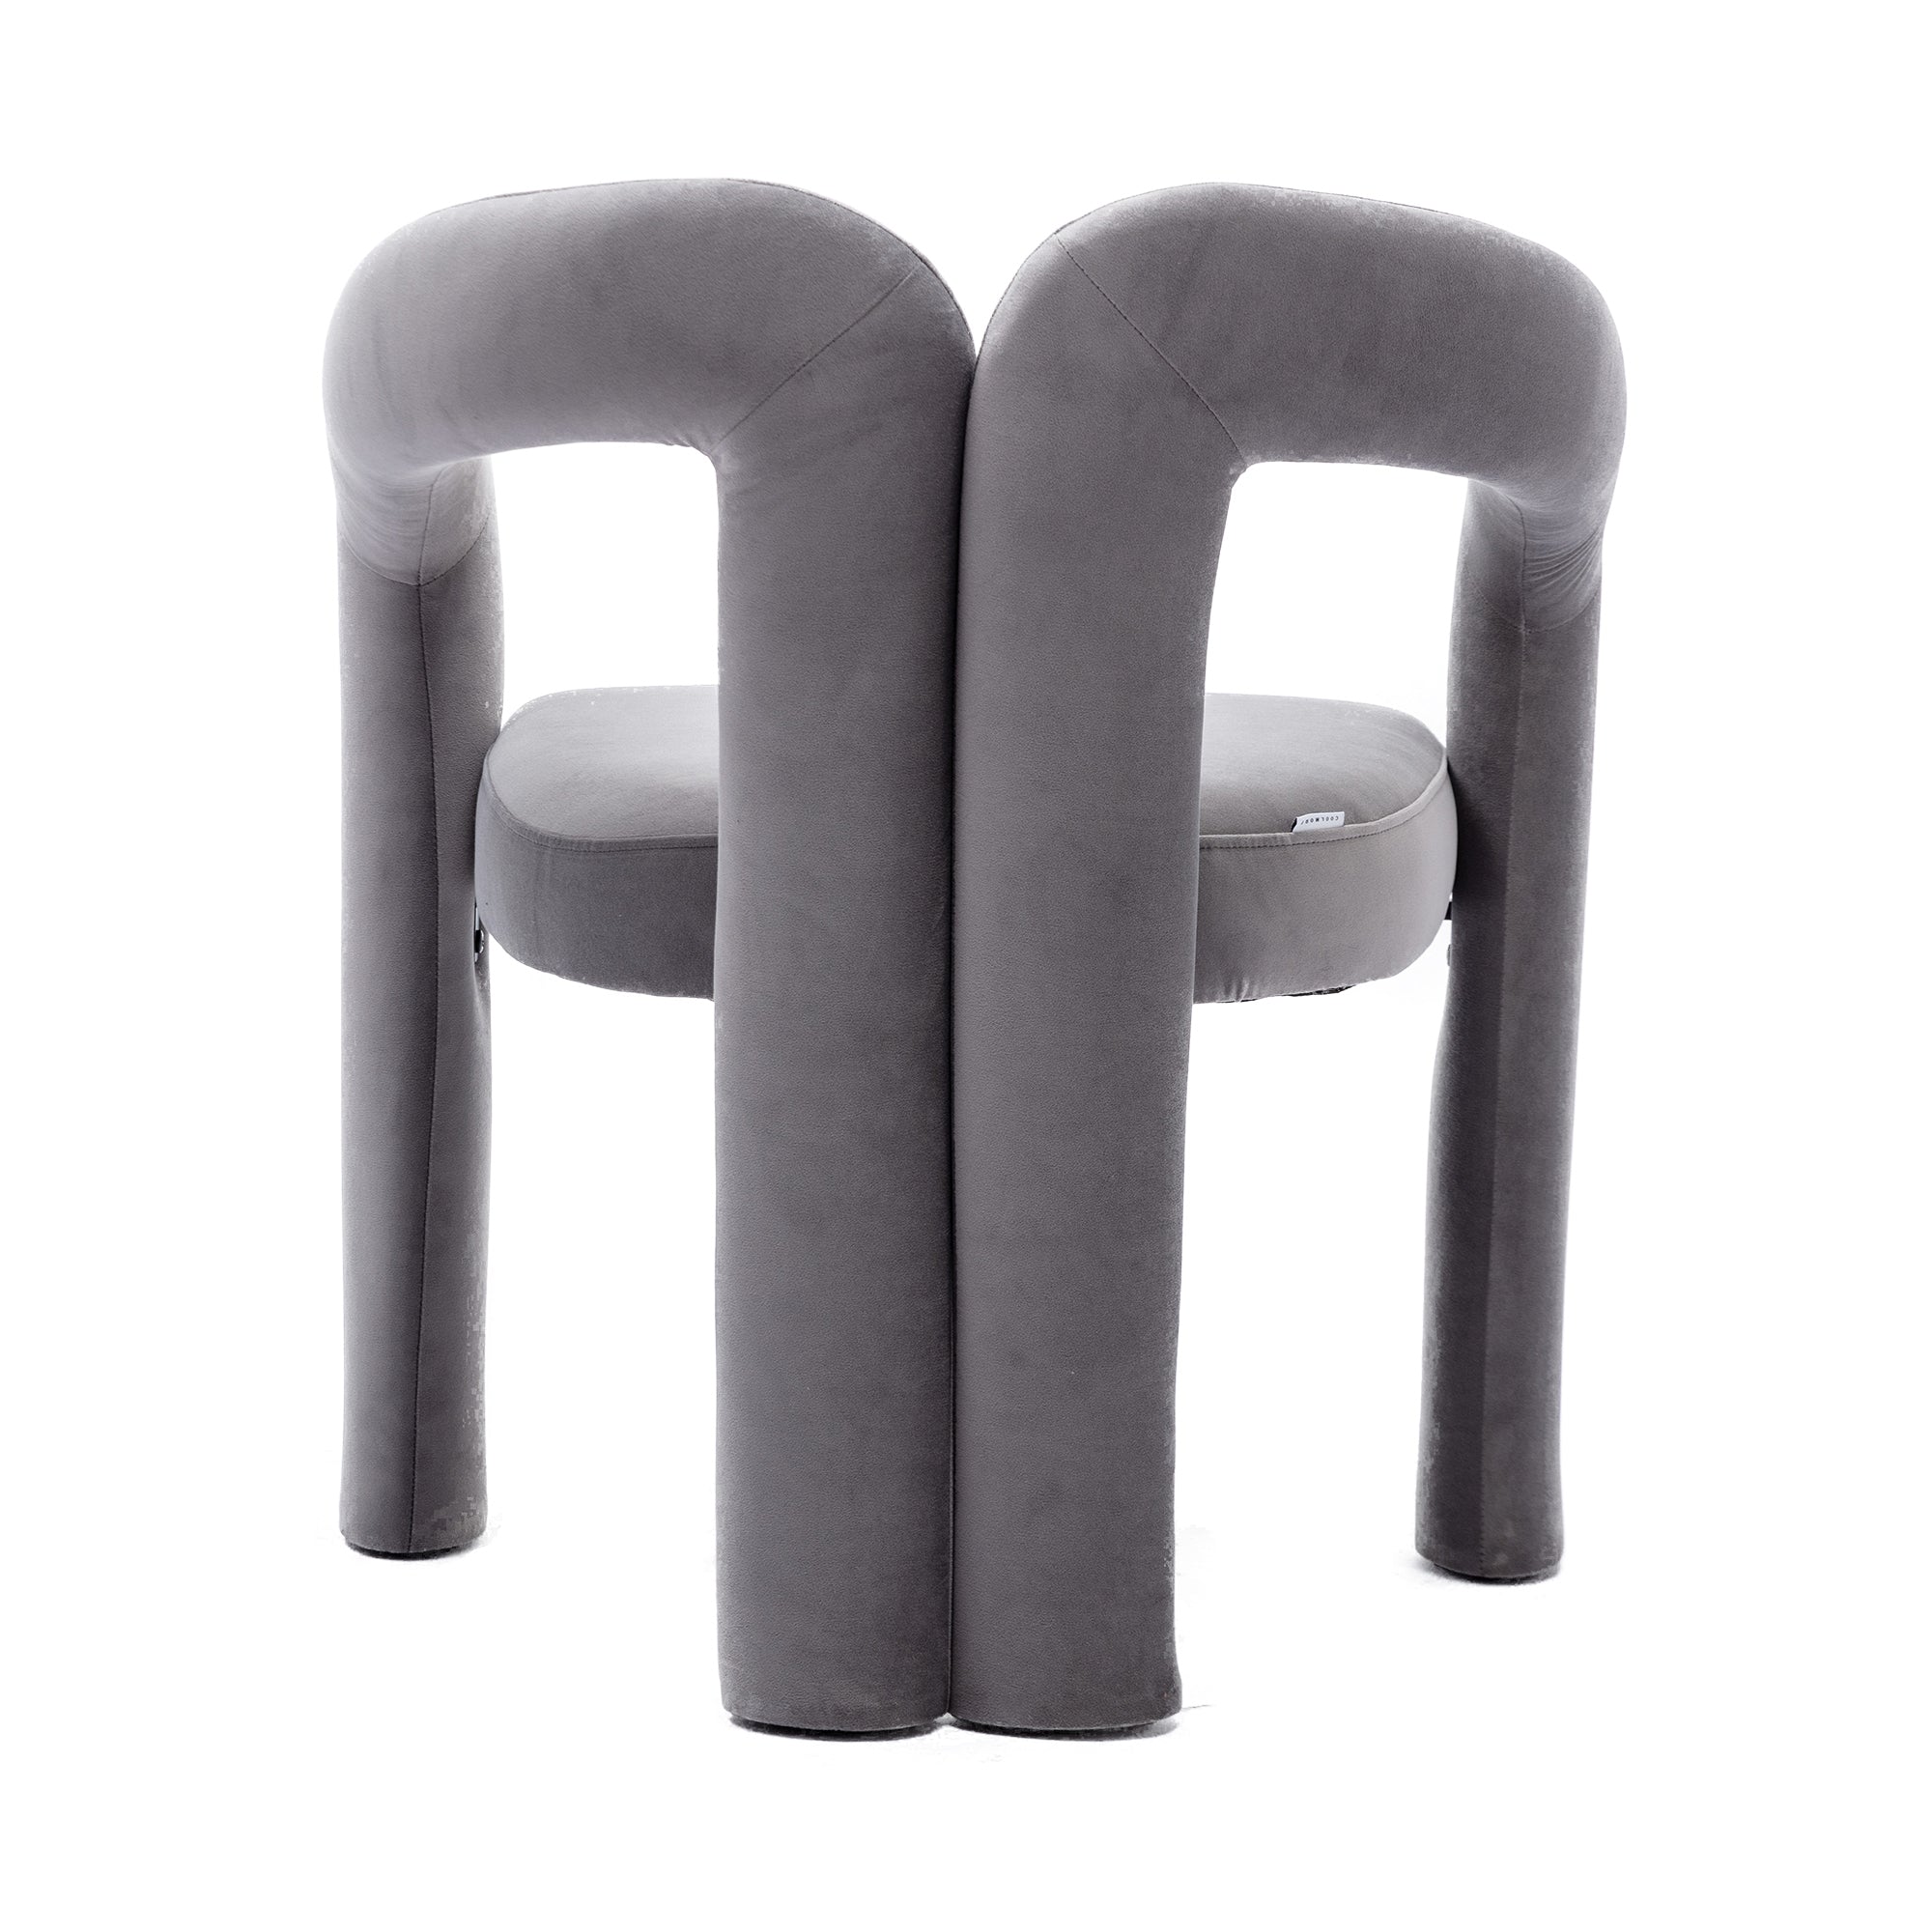 Contemporary Designed Fabric Upholstered Accent/Dining Chair /Barrel Side Chairs (Set of 2) - Grey